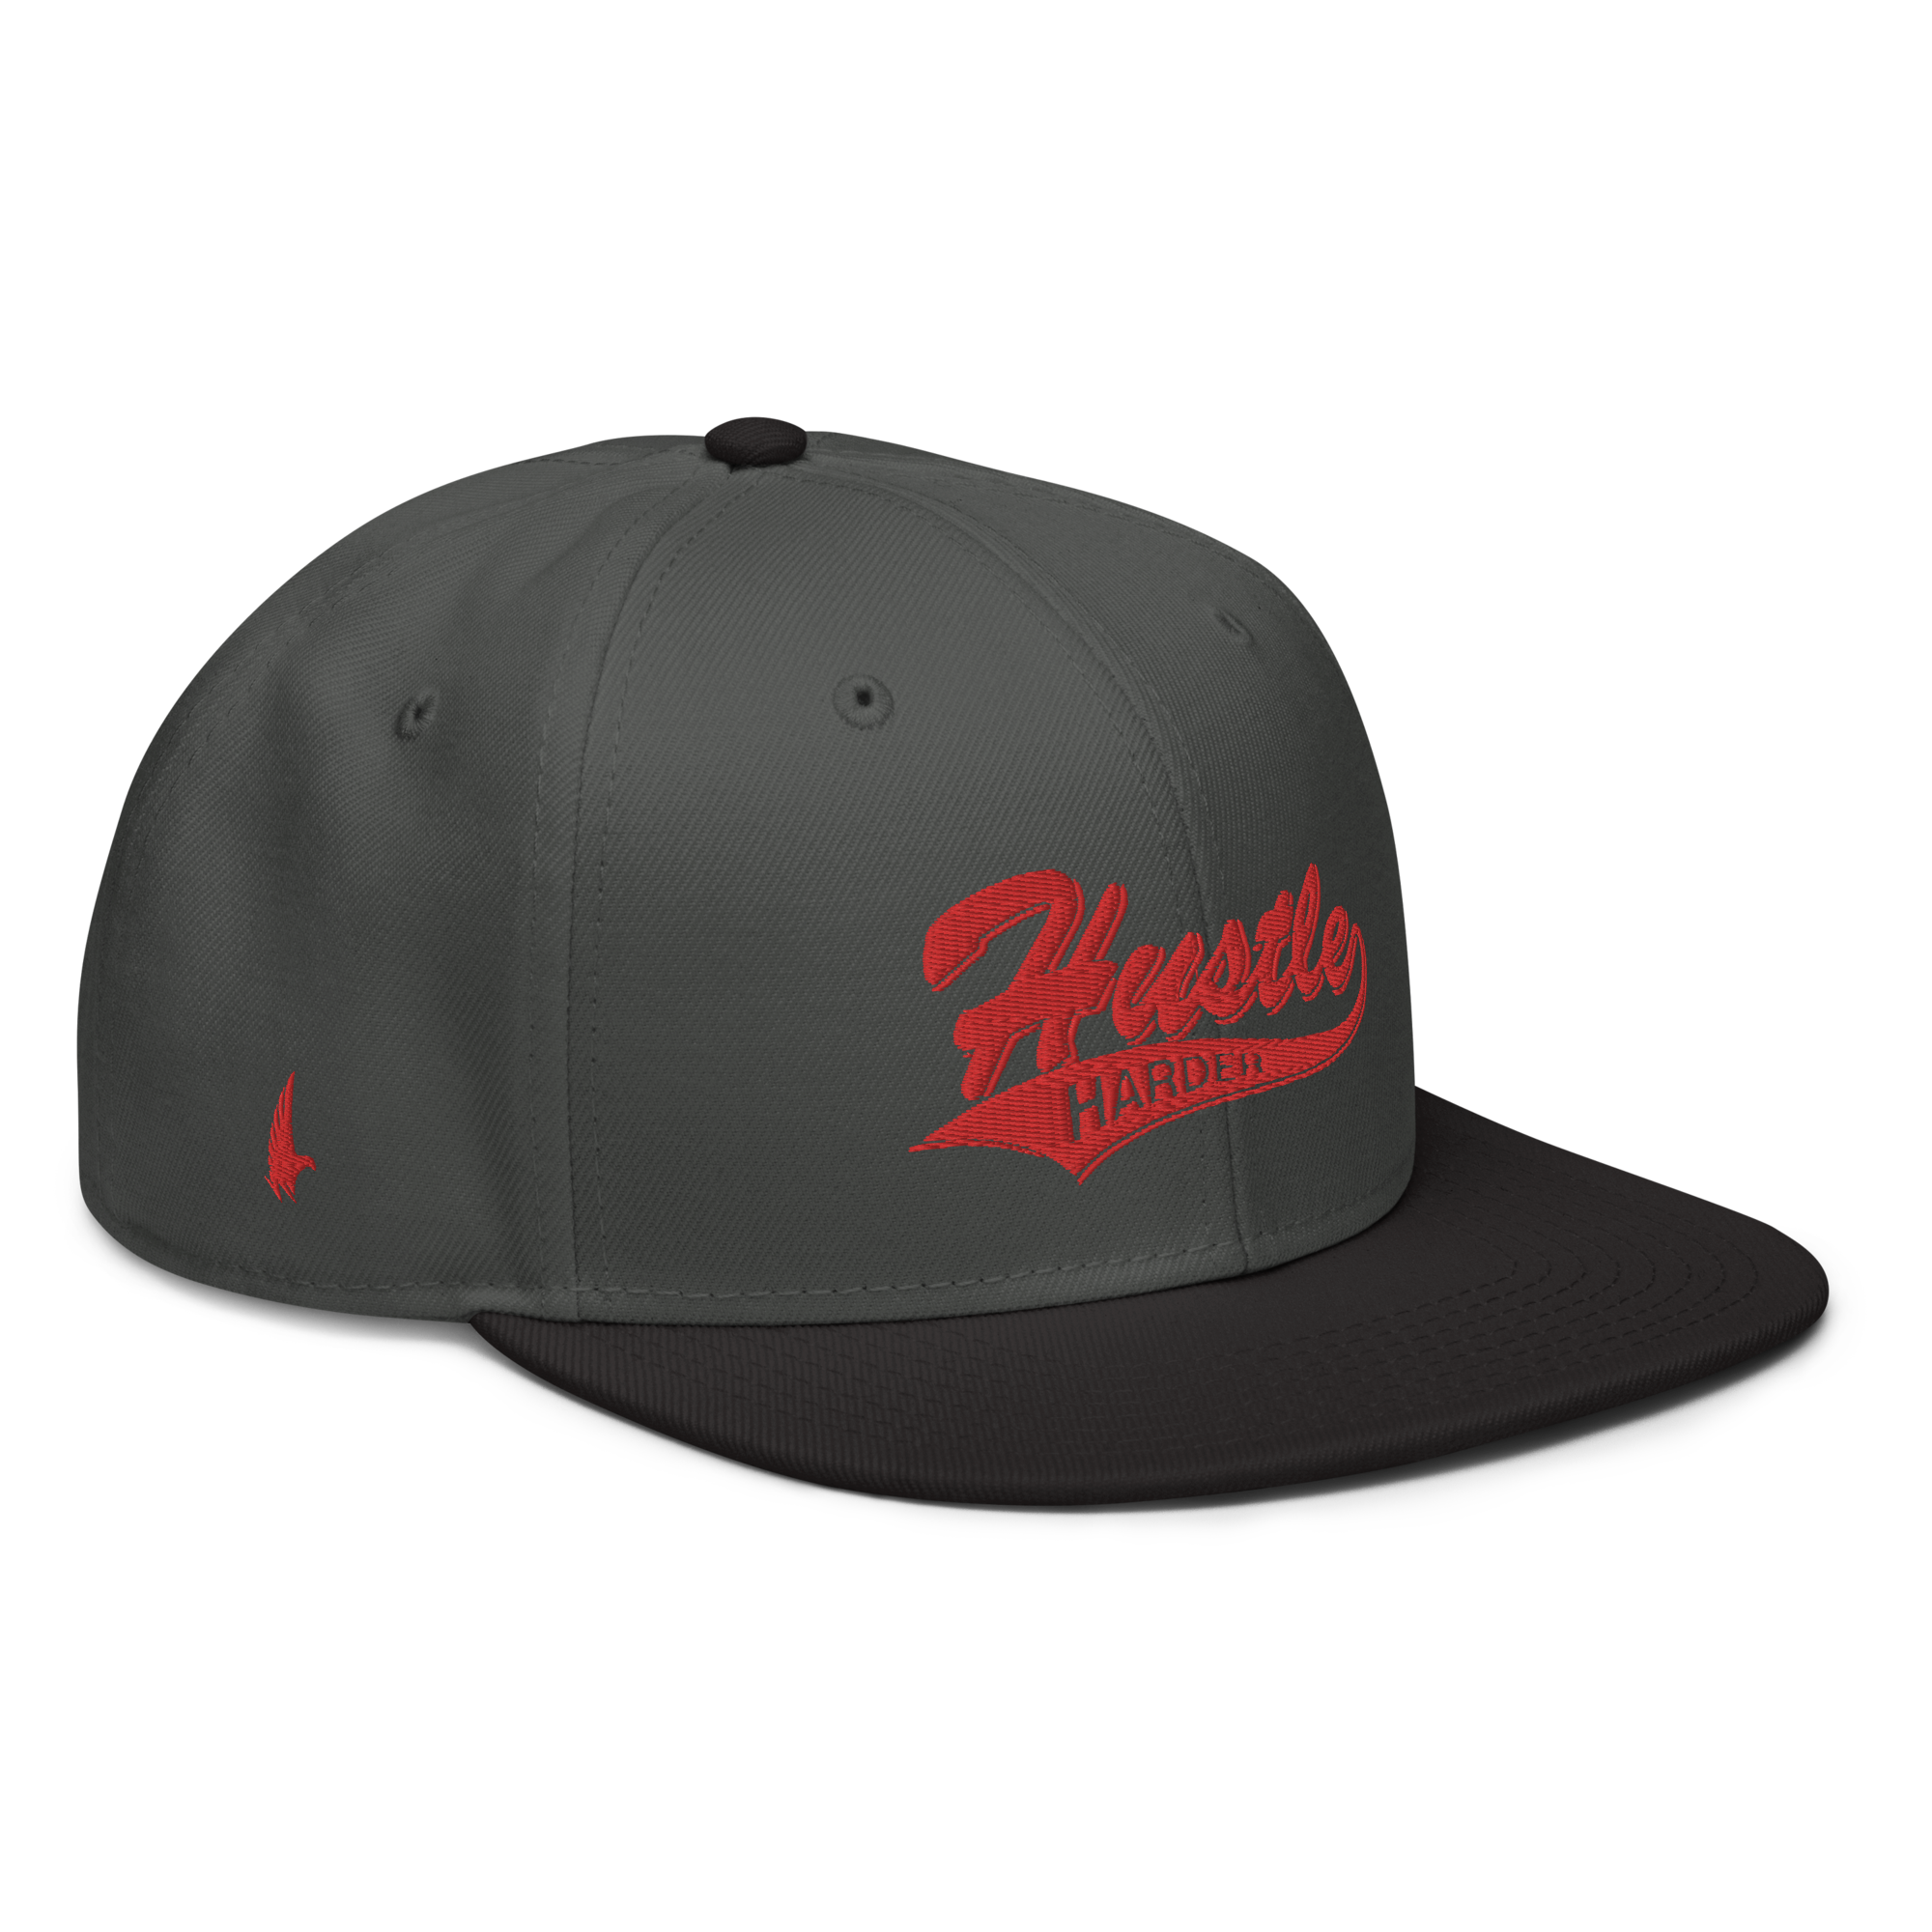 Hustle Harder Snapback Hat - Charcoal Gray / Red OS - Loyalty Vibes